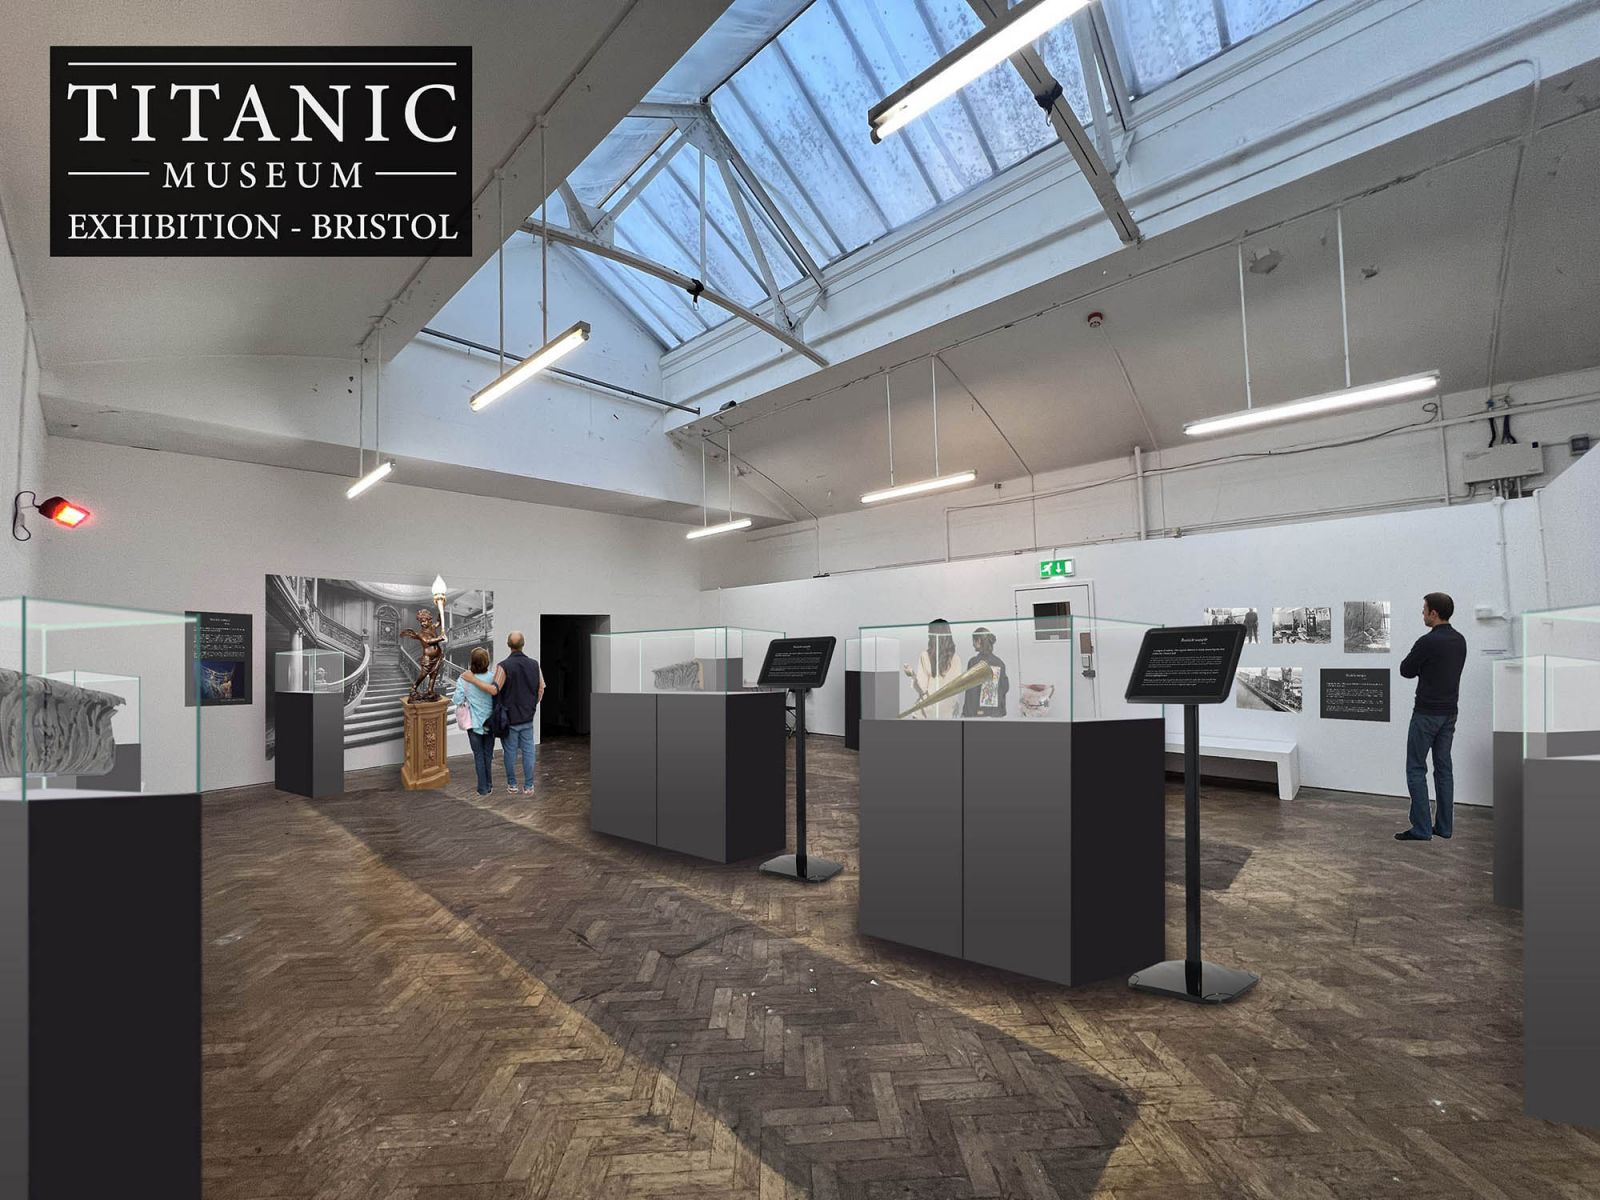 Catch a new Titanic exhibition at The Island next month